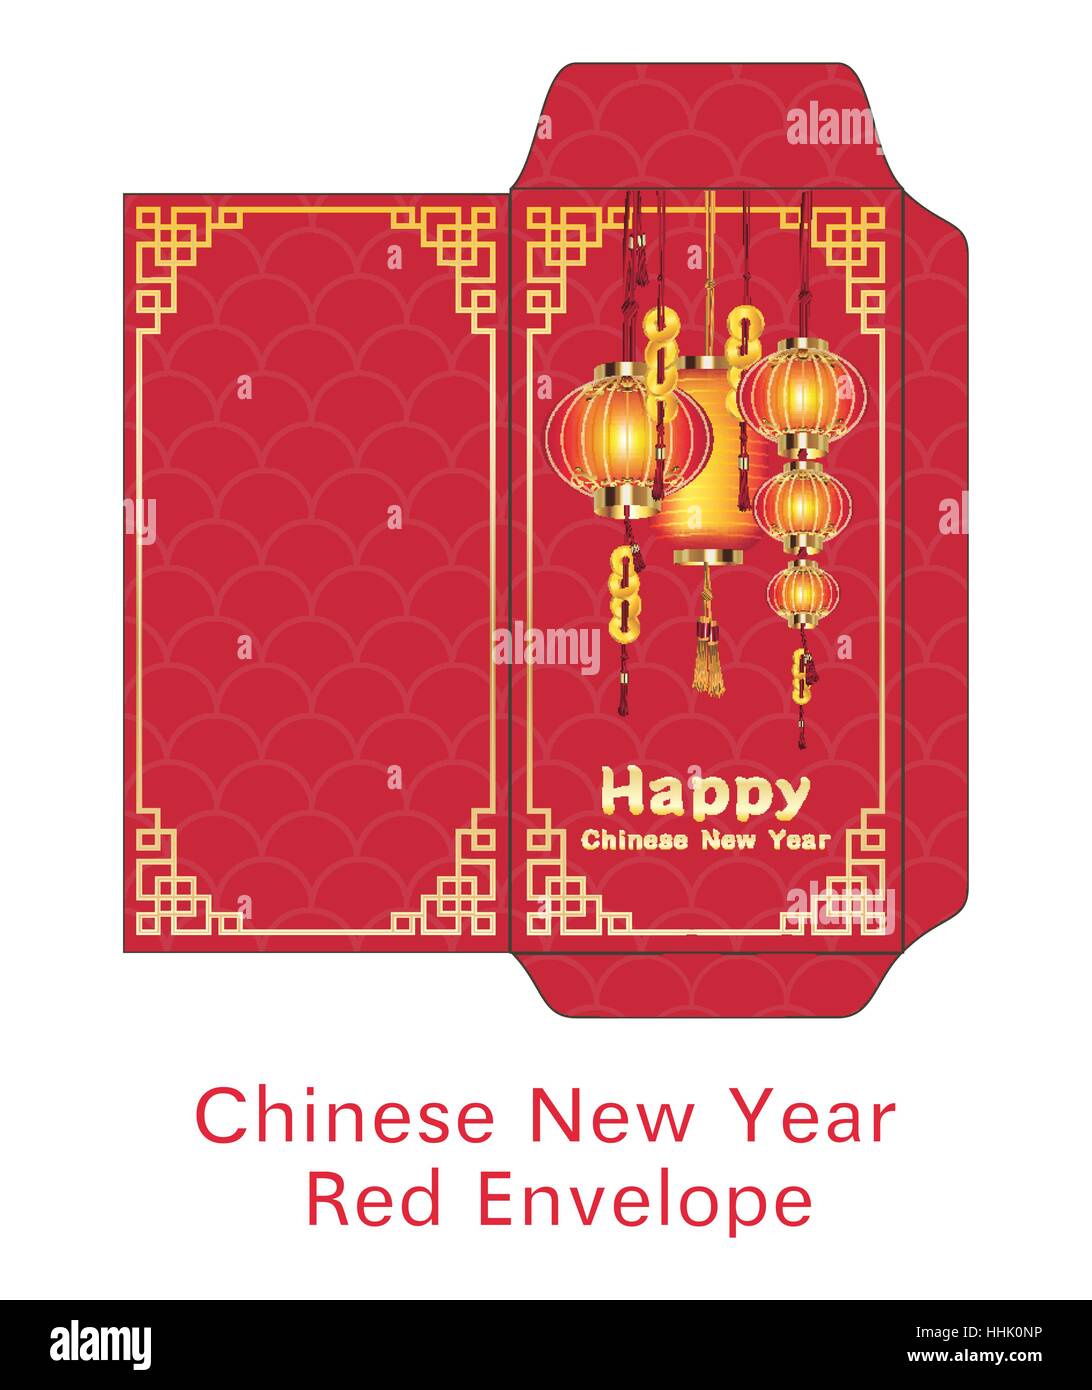 Red envelope design Cut Out Stock Images & Pictures - Alamy